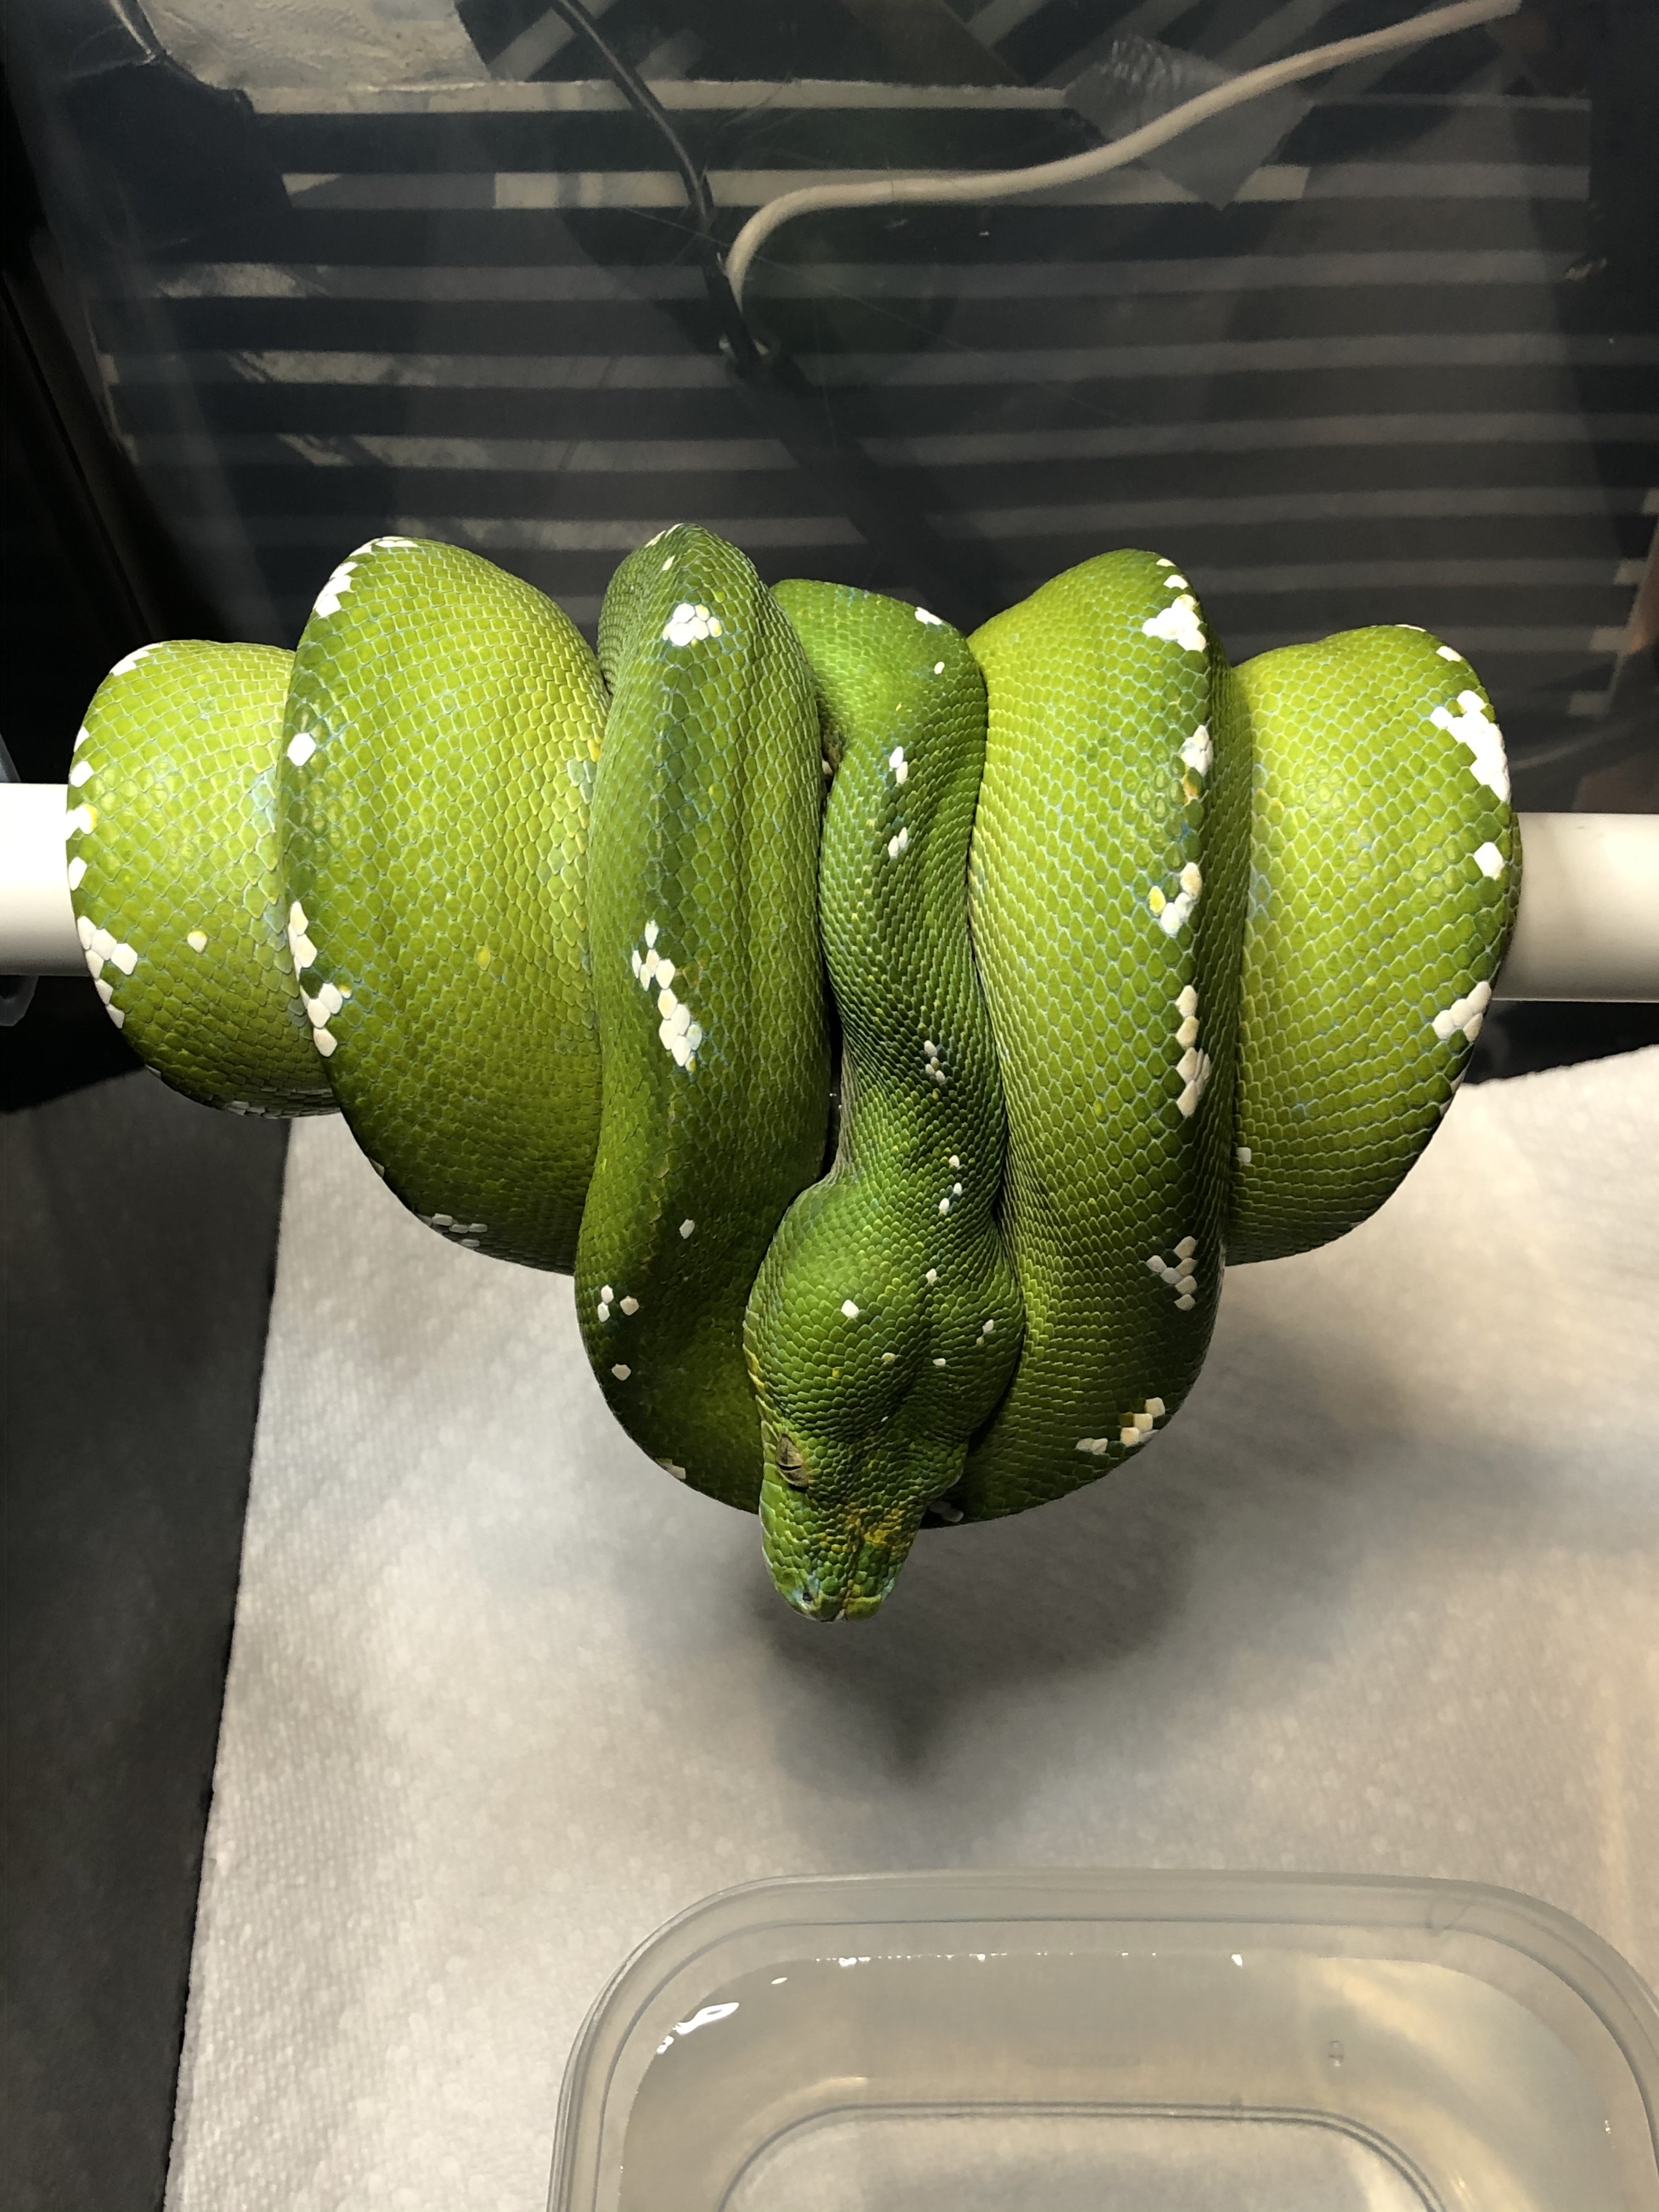 Adult Male Aru Green Tree Python by Mile high chondros